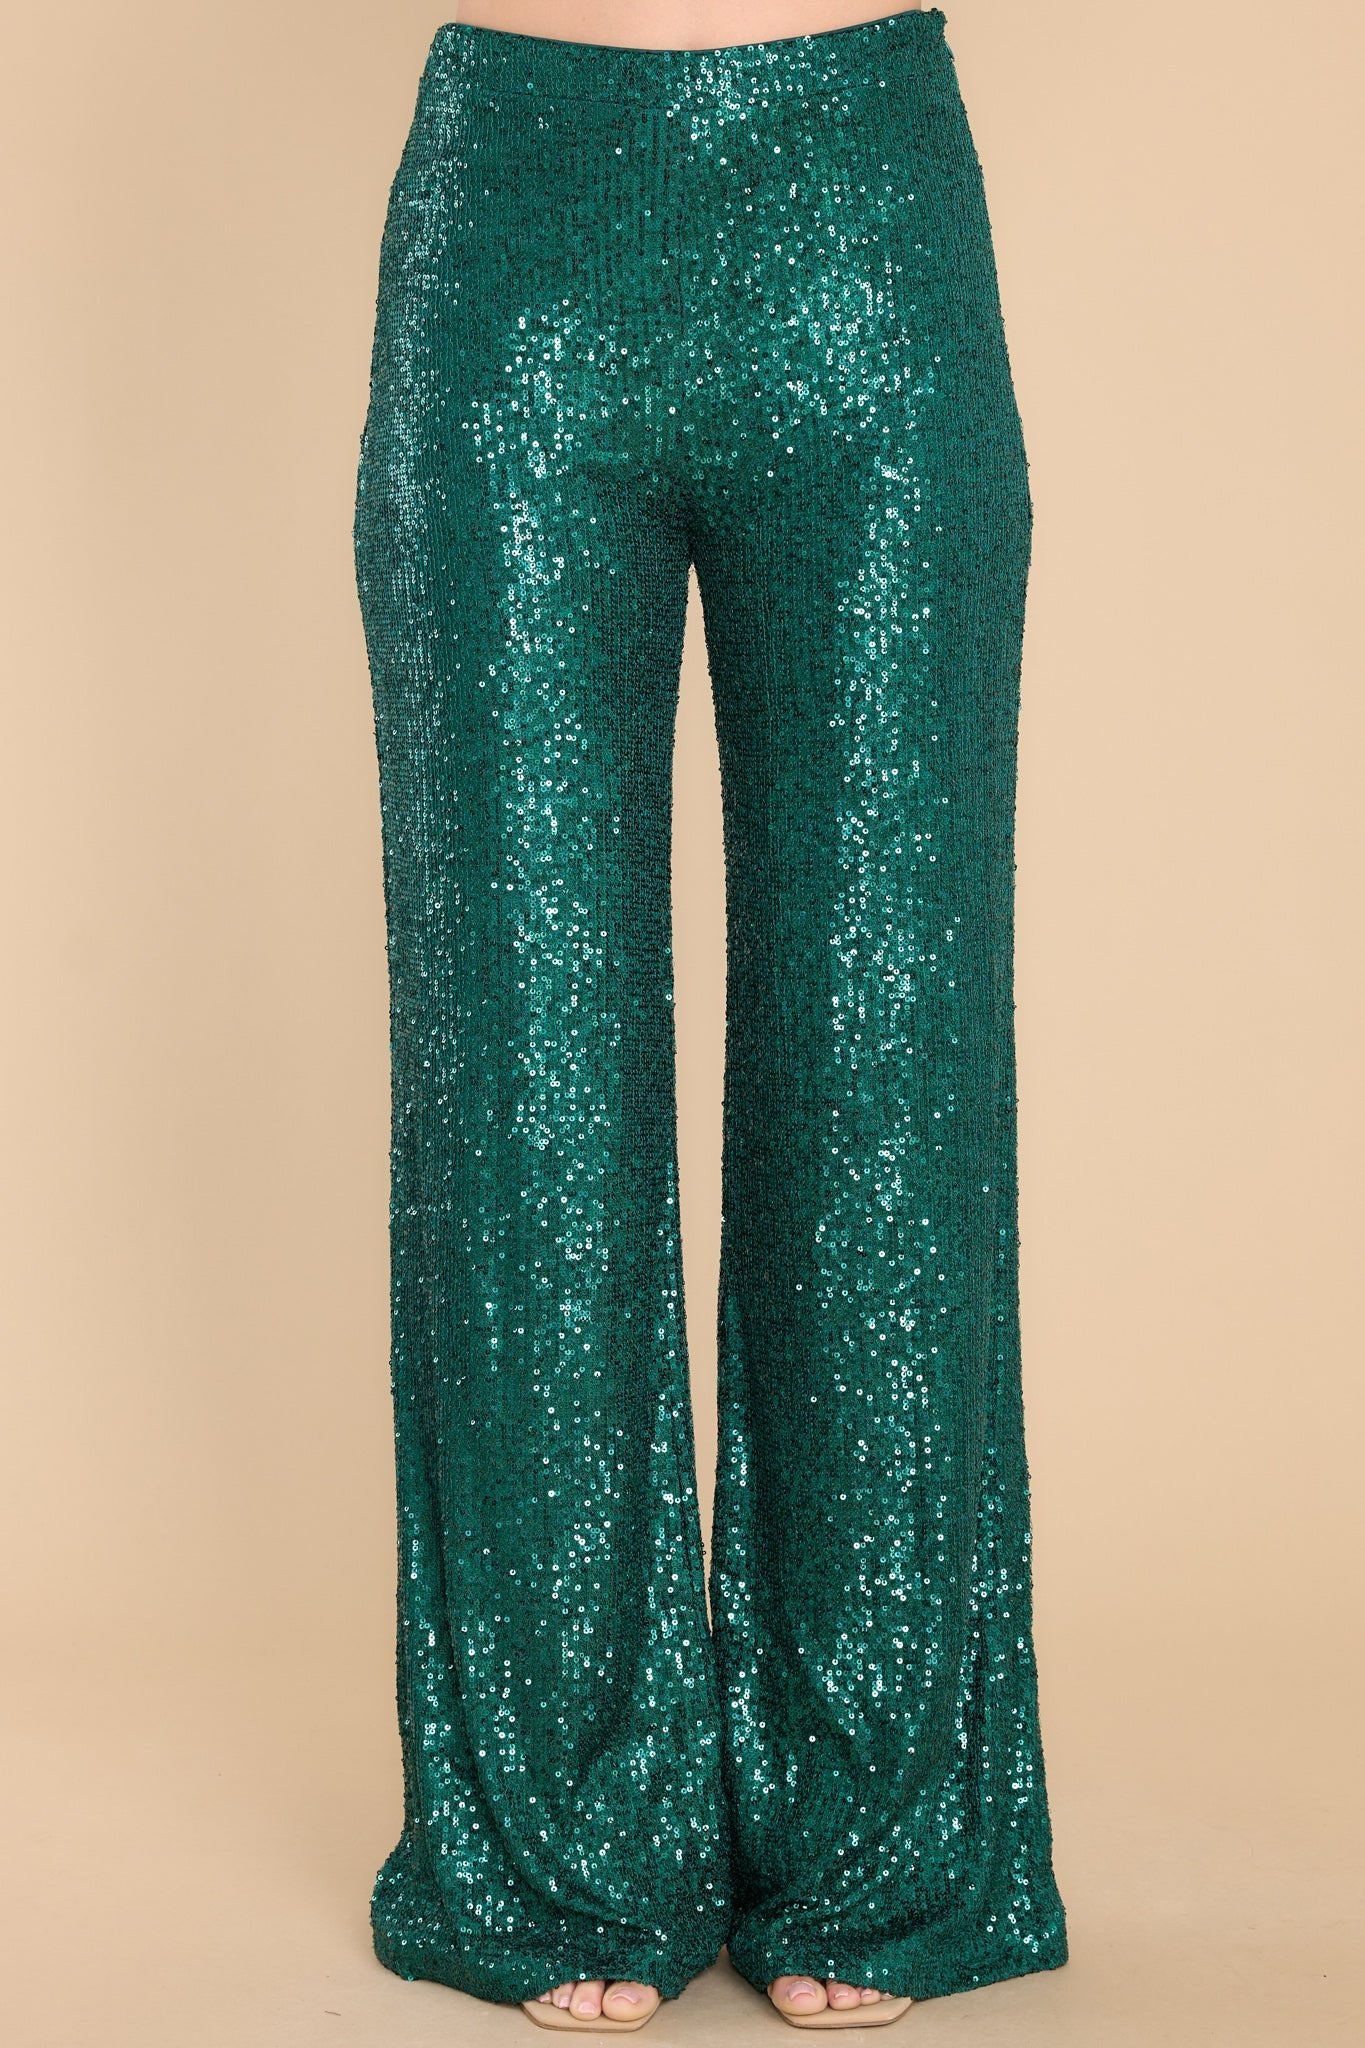 Like A Star Emerald Green Sequin Pants - Red Dress